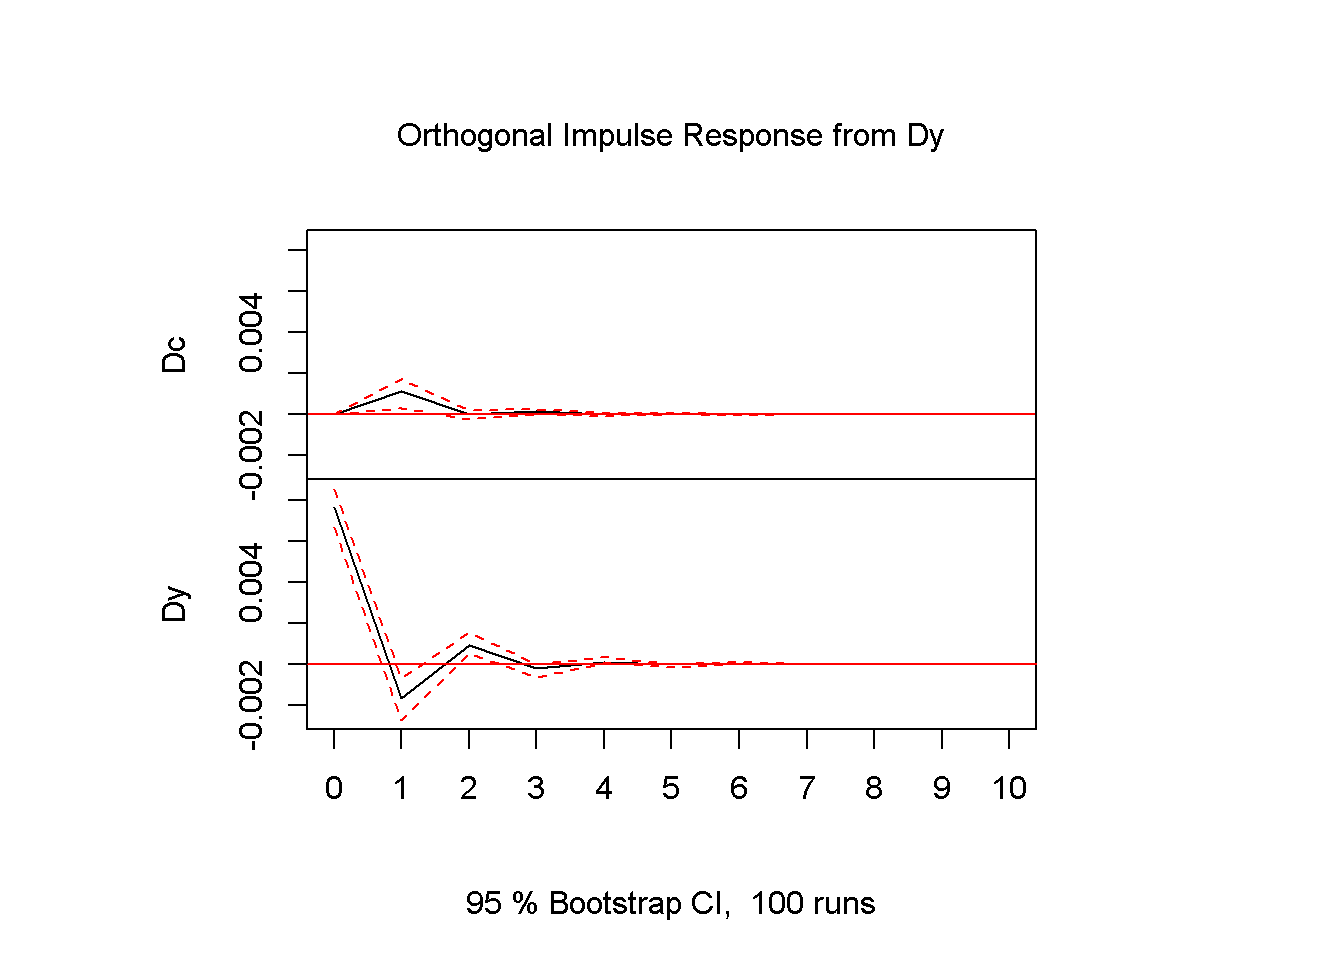 Impulse response diagrams for the series c and y, dataset fred